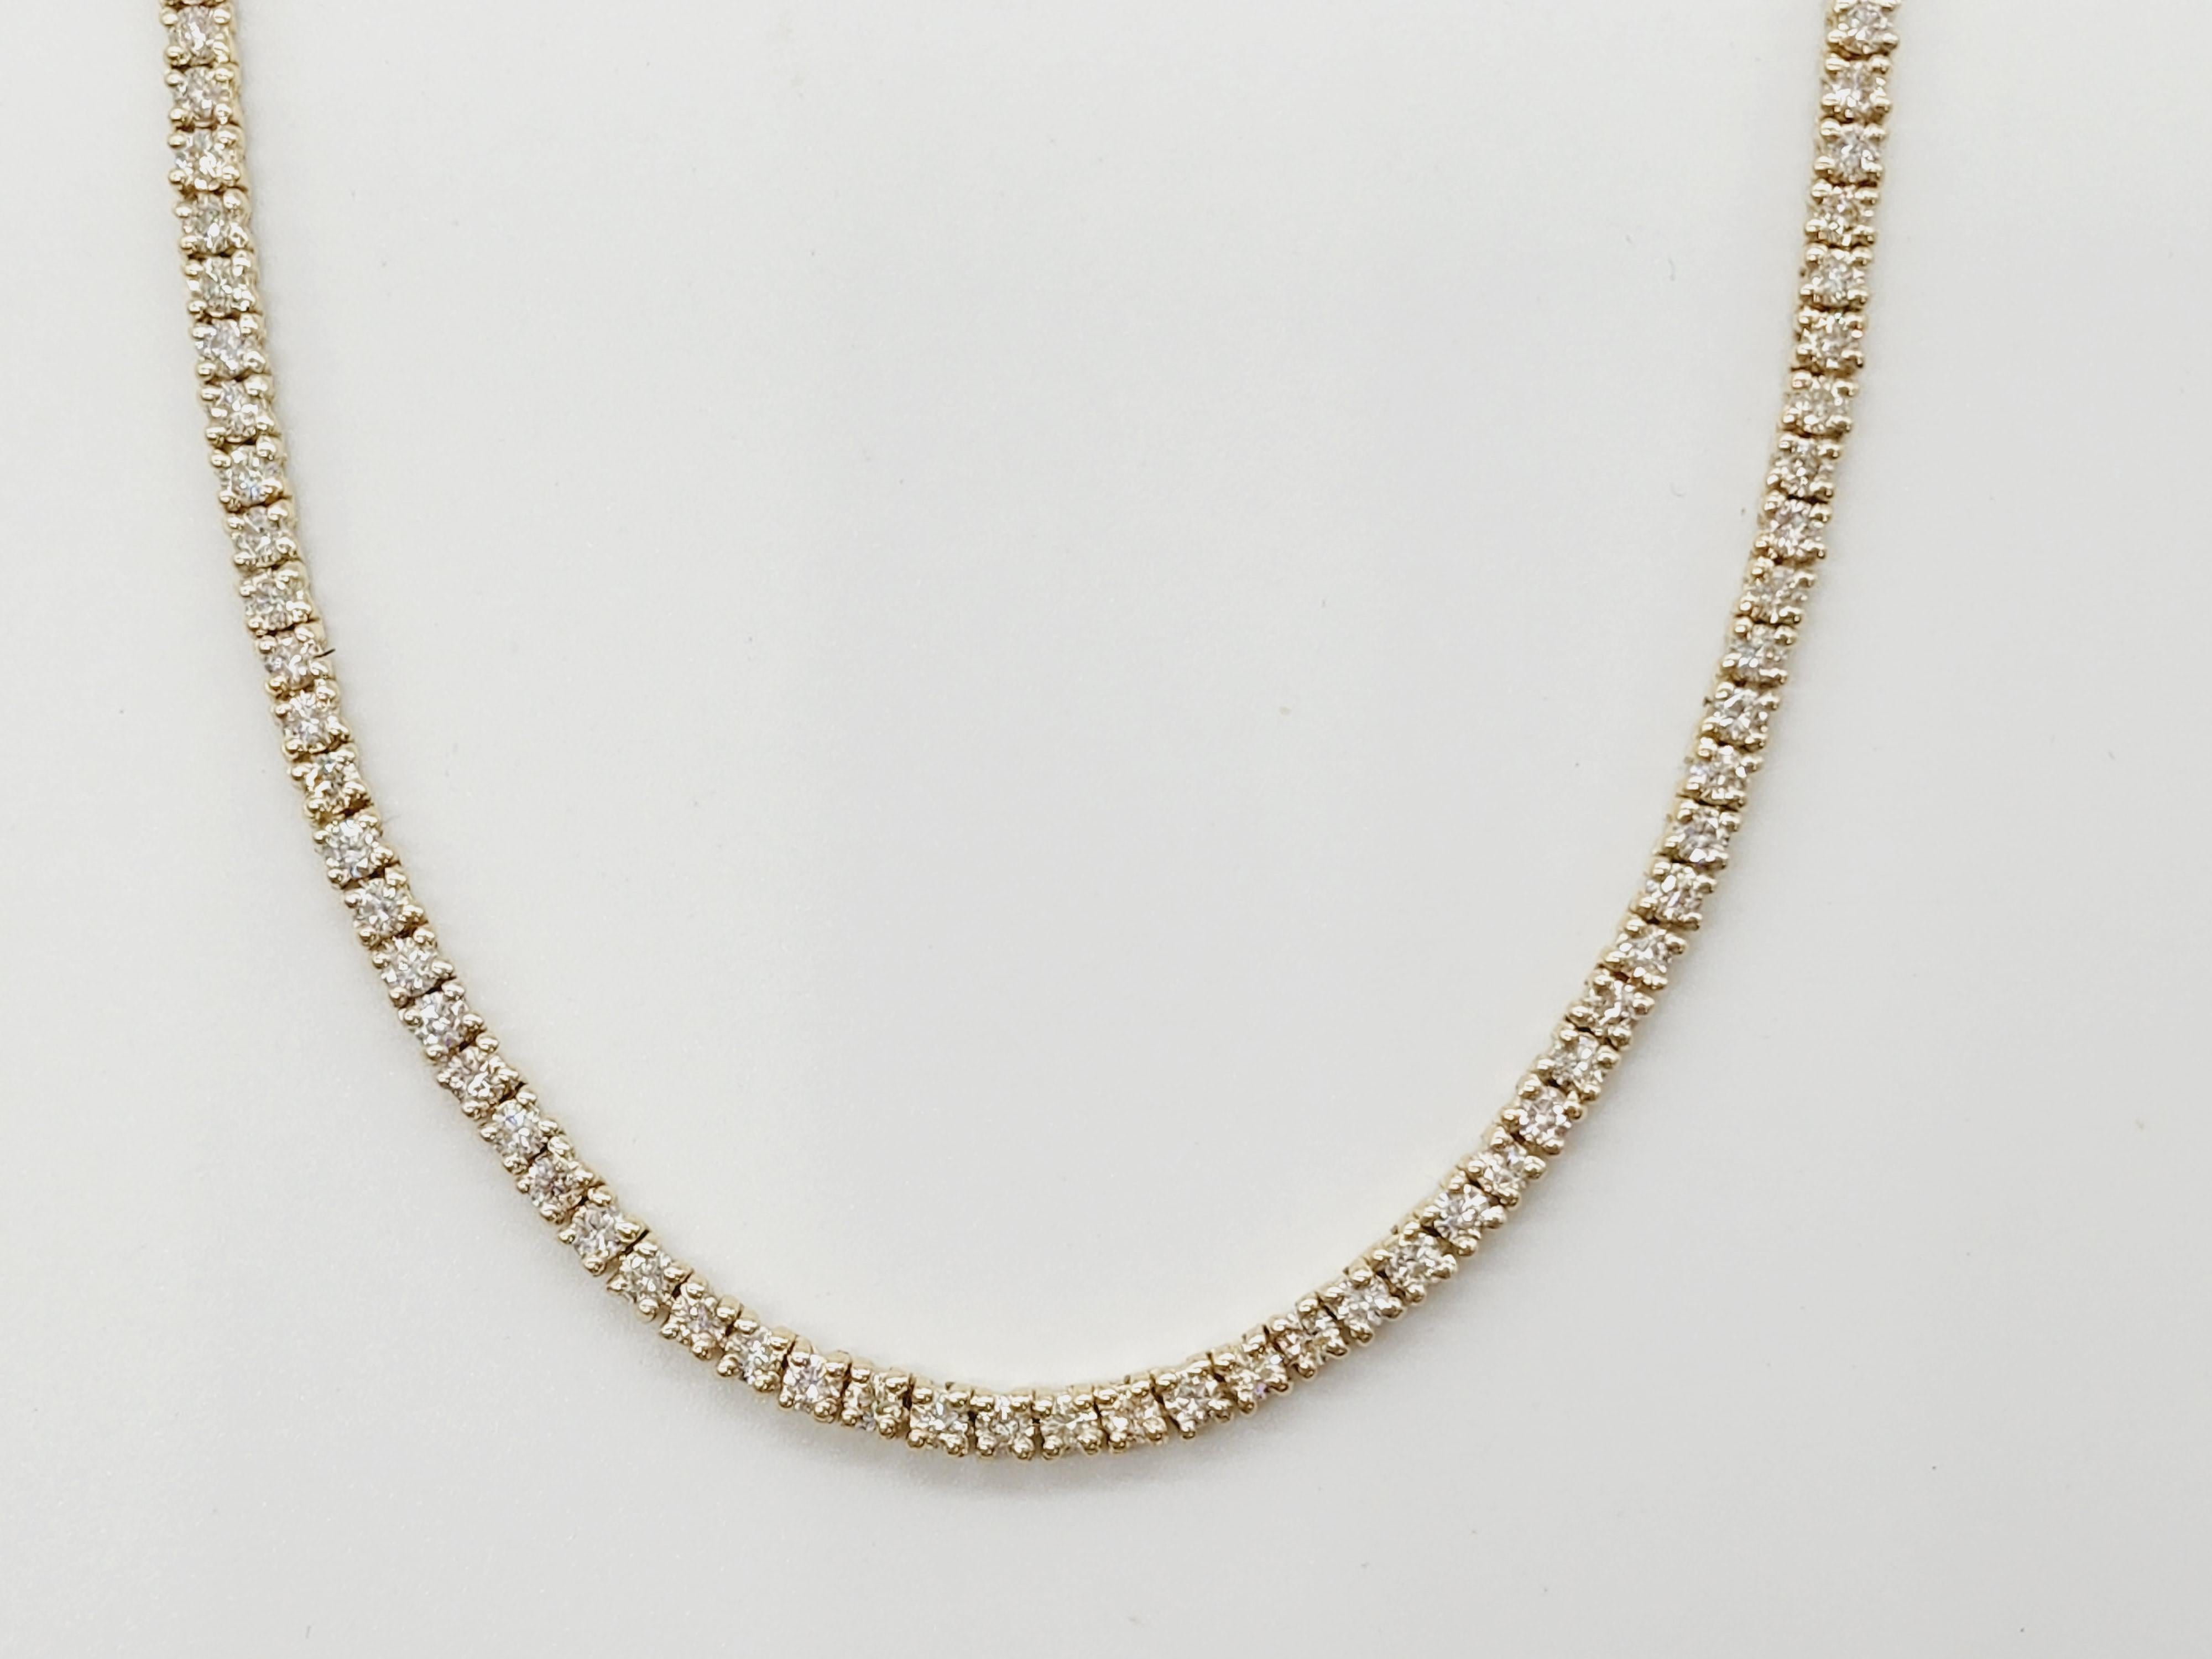 Brilliant and beautiful tennis necklace, natural round-brilliant cut white diamonds clean and Excellent shine. 
14k yellow gold classic four-prong style for maximum light brilliance. 
16 inch length. Average H Color, VS Clarity. 